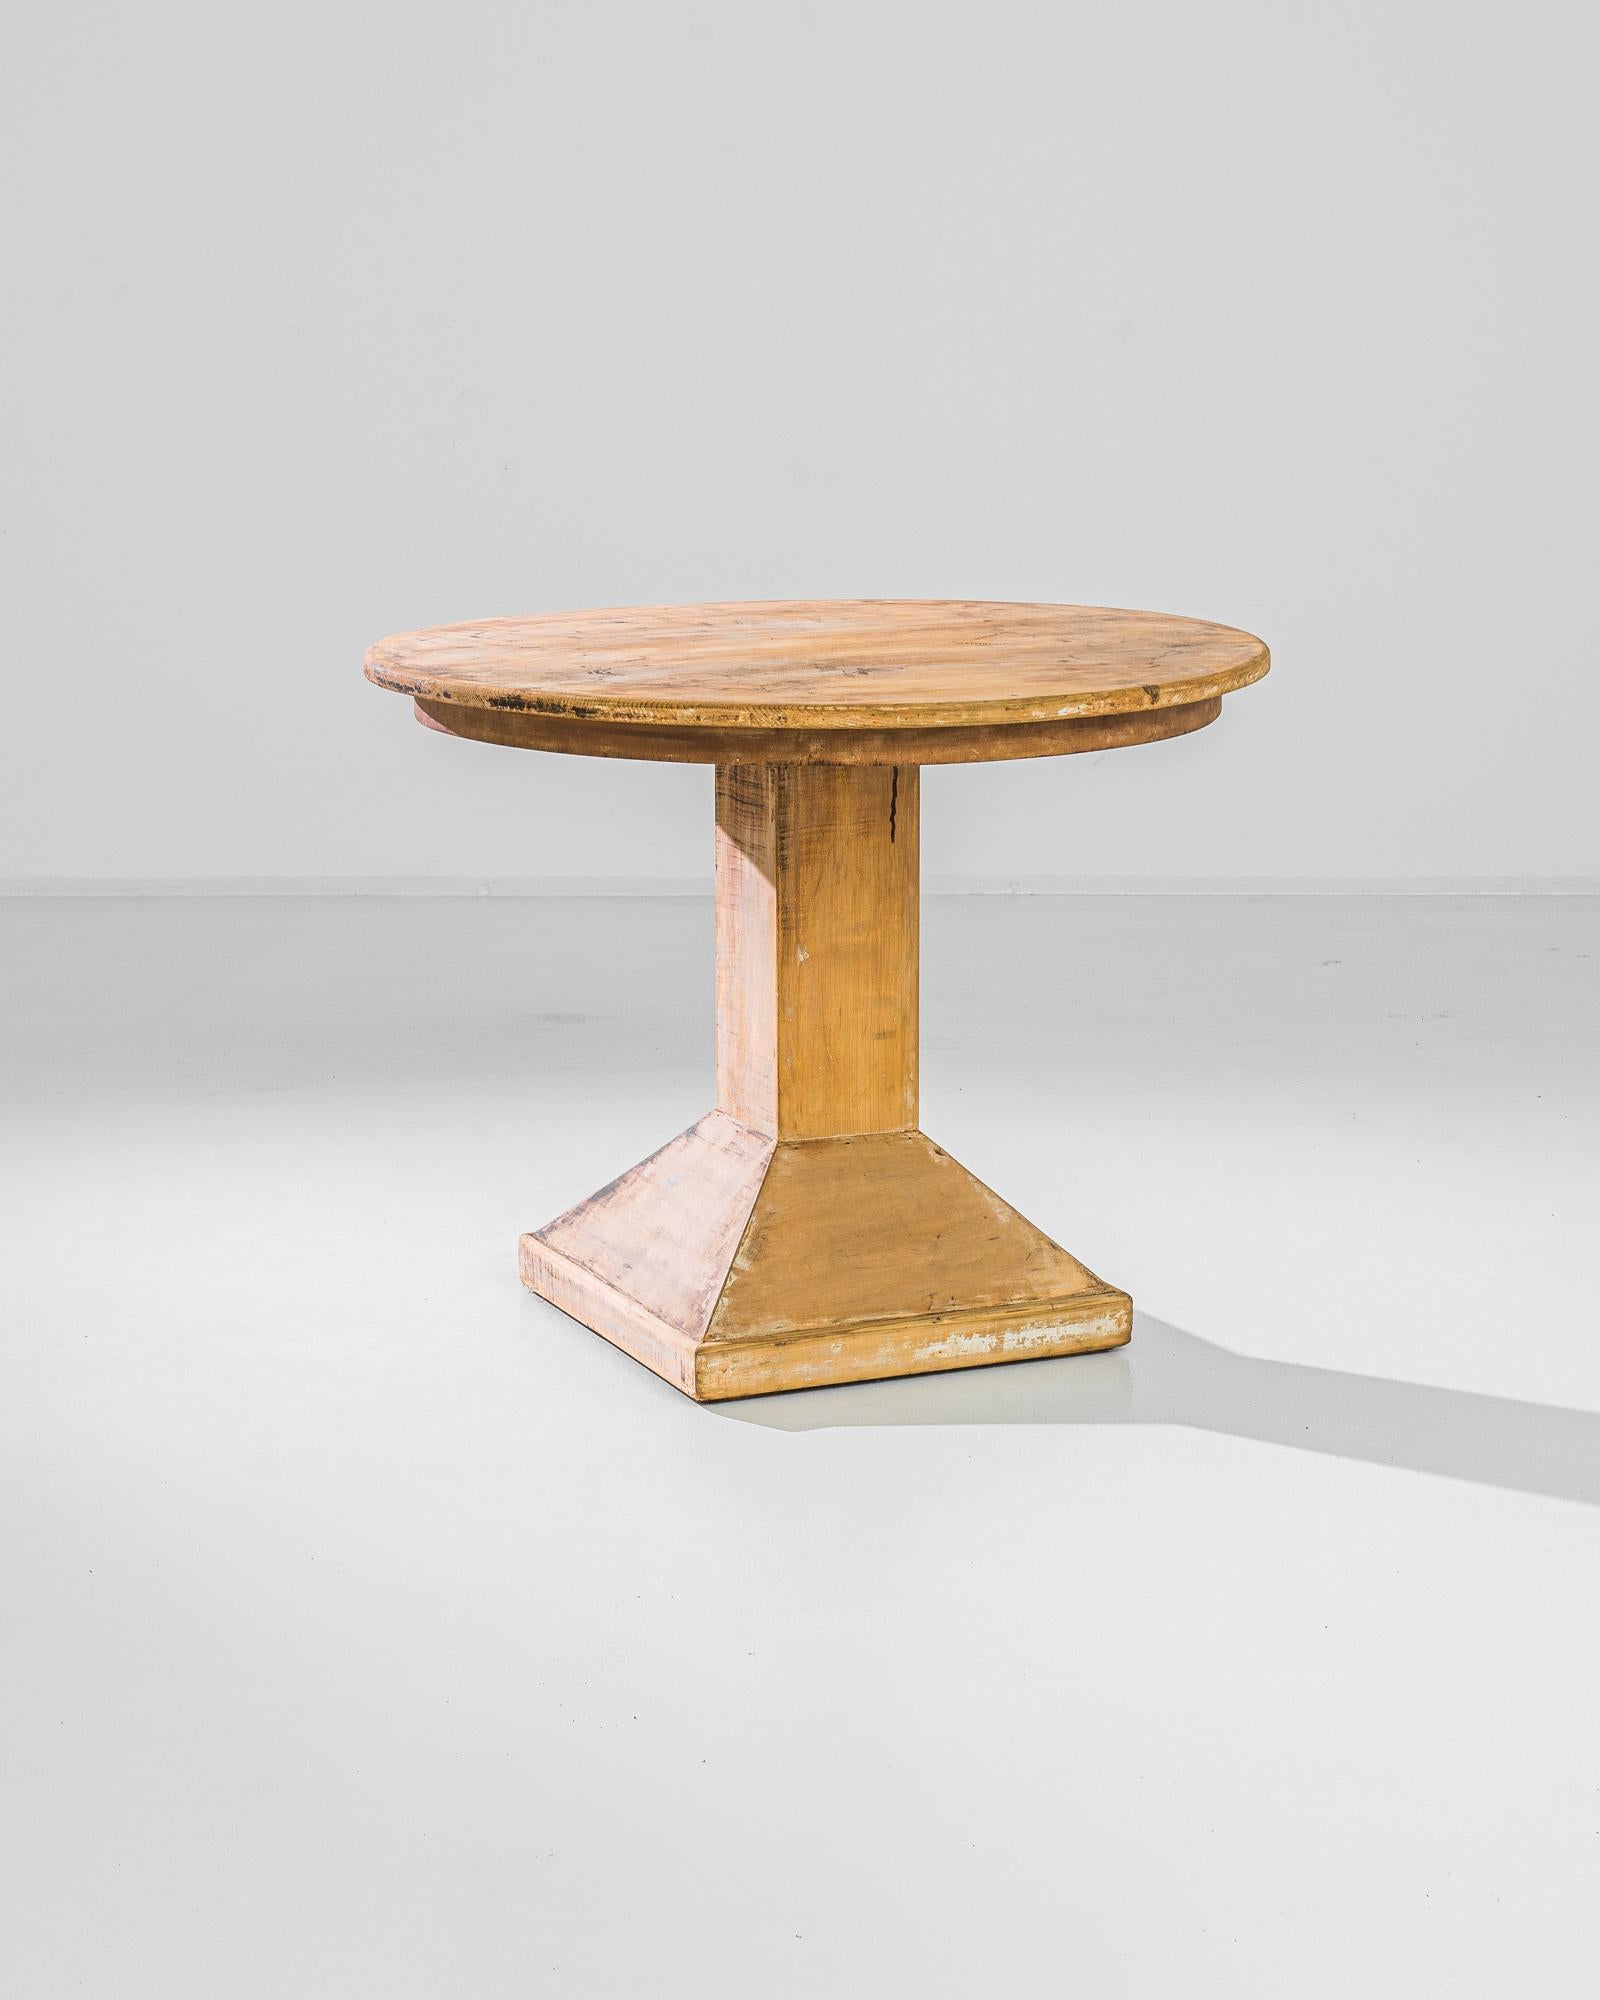 This vintage table made in France circa 1940 presents a perfectly balanced anatomy of geometric shapes: a sturdy triangle base connected with a circular table top by a rectangular leg. The natural wood finish of a light optimistic tone with